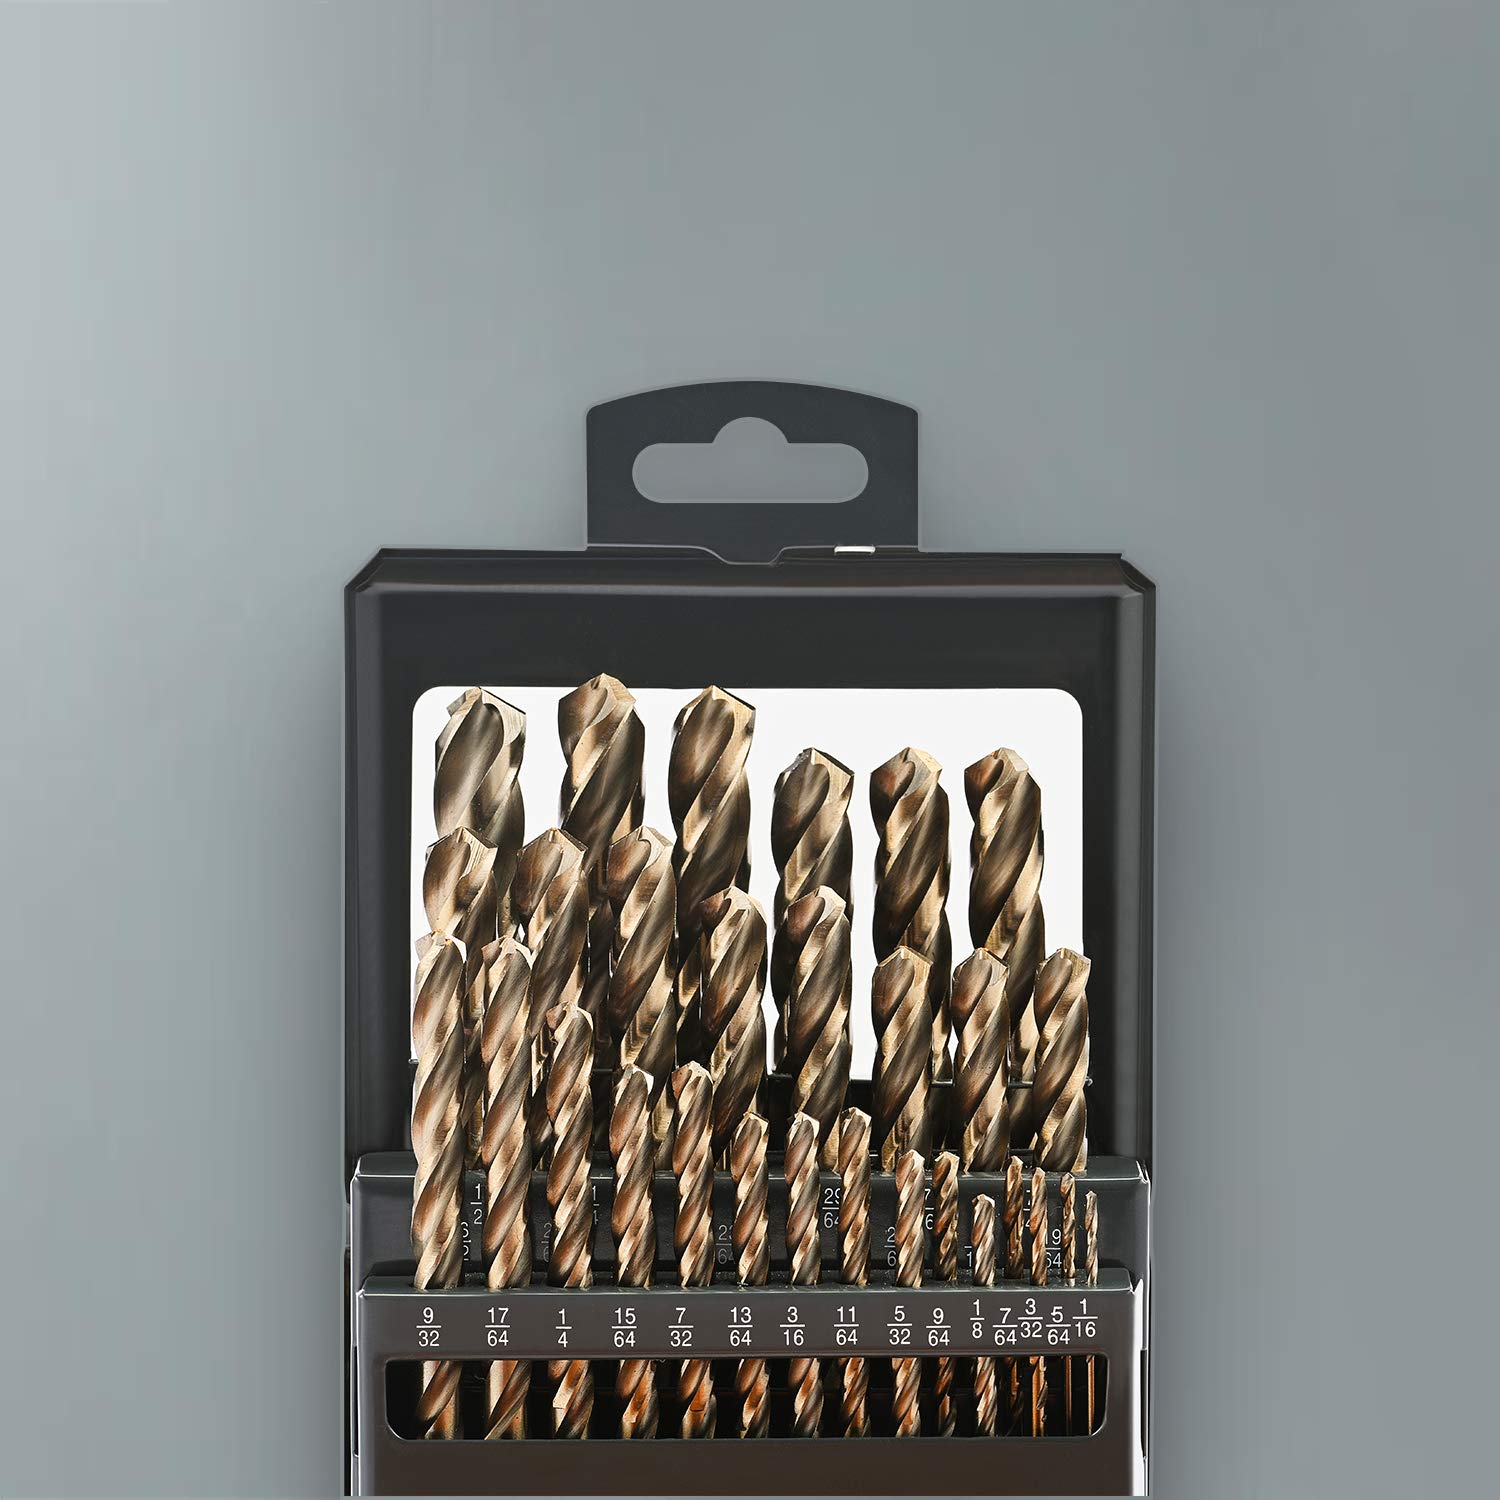 Lichamp 29PCS HSS Cobalt Drill Bits Set 1/16" to 1/2" with Three Flute for Hard Metal, Hardened Stainless Steel and Cast Iron